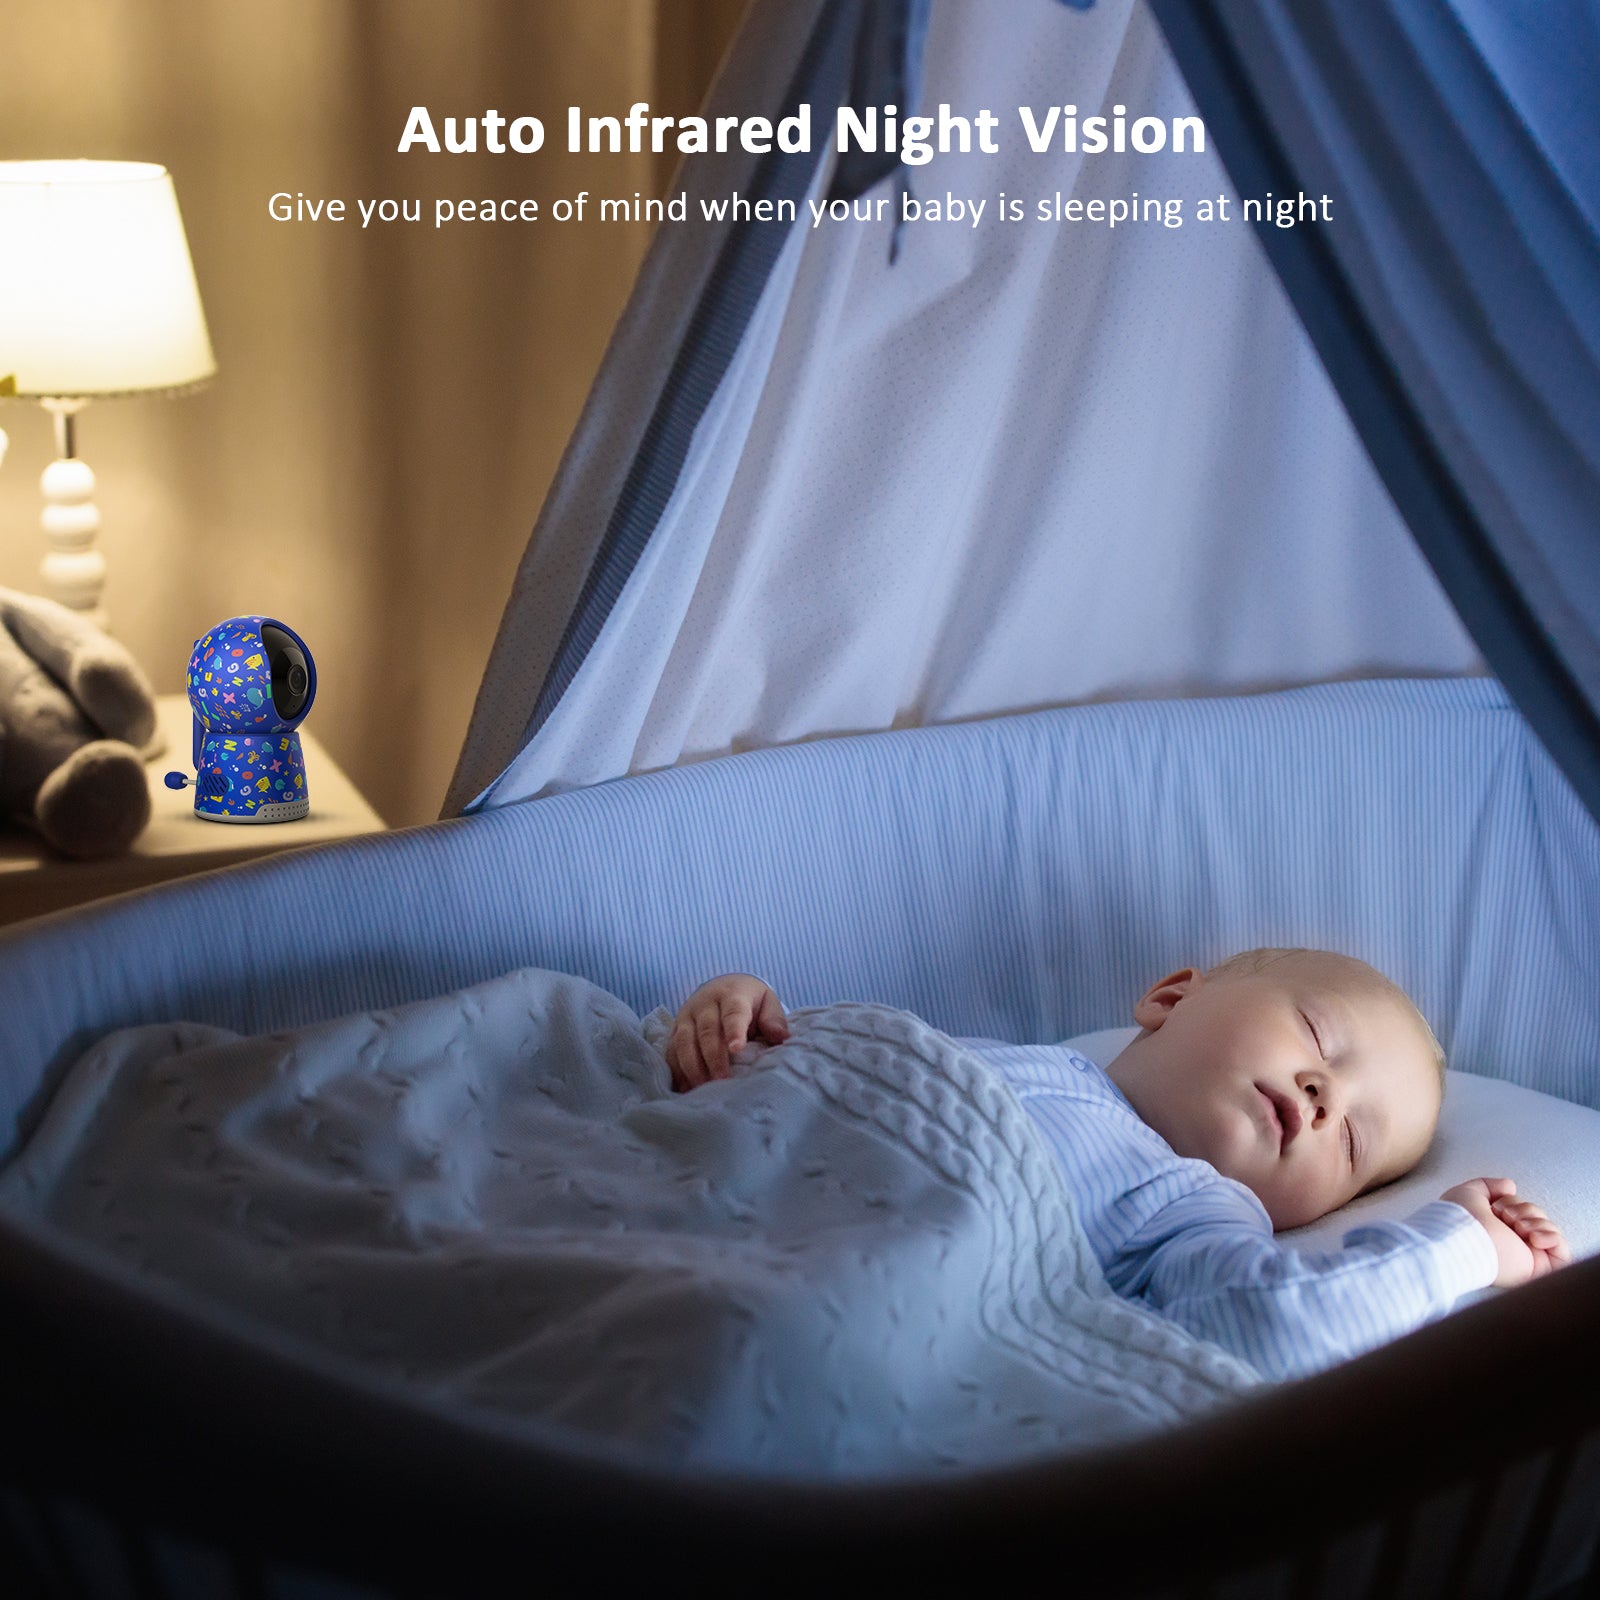 Auto Infrared Night Vision, clear vision even at night.